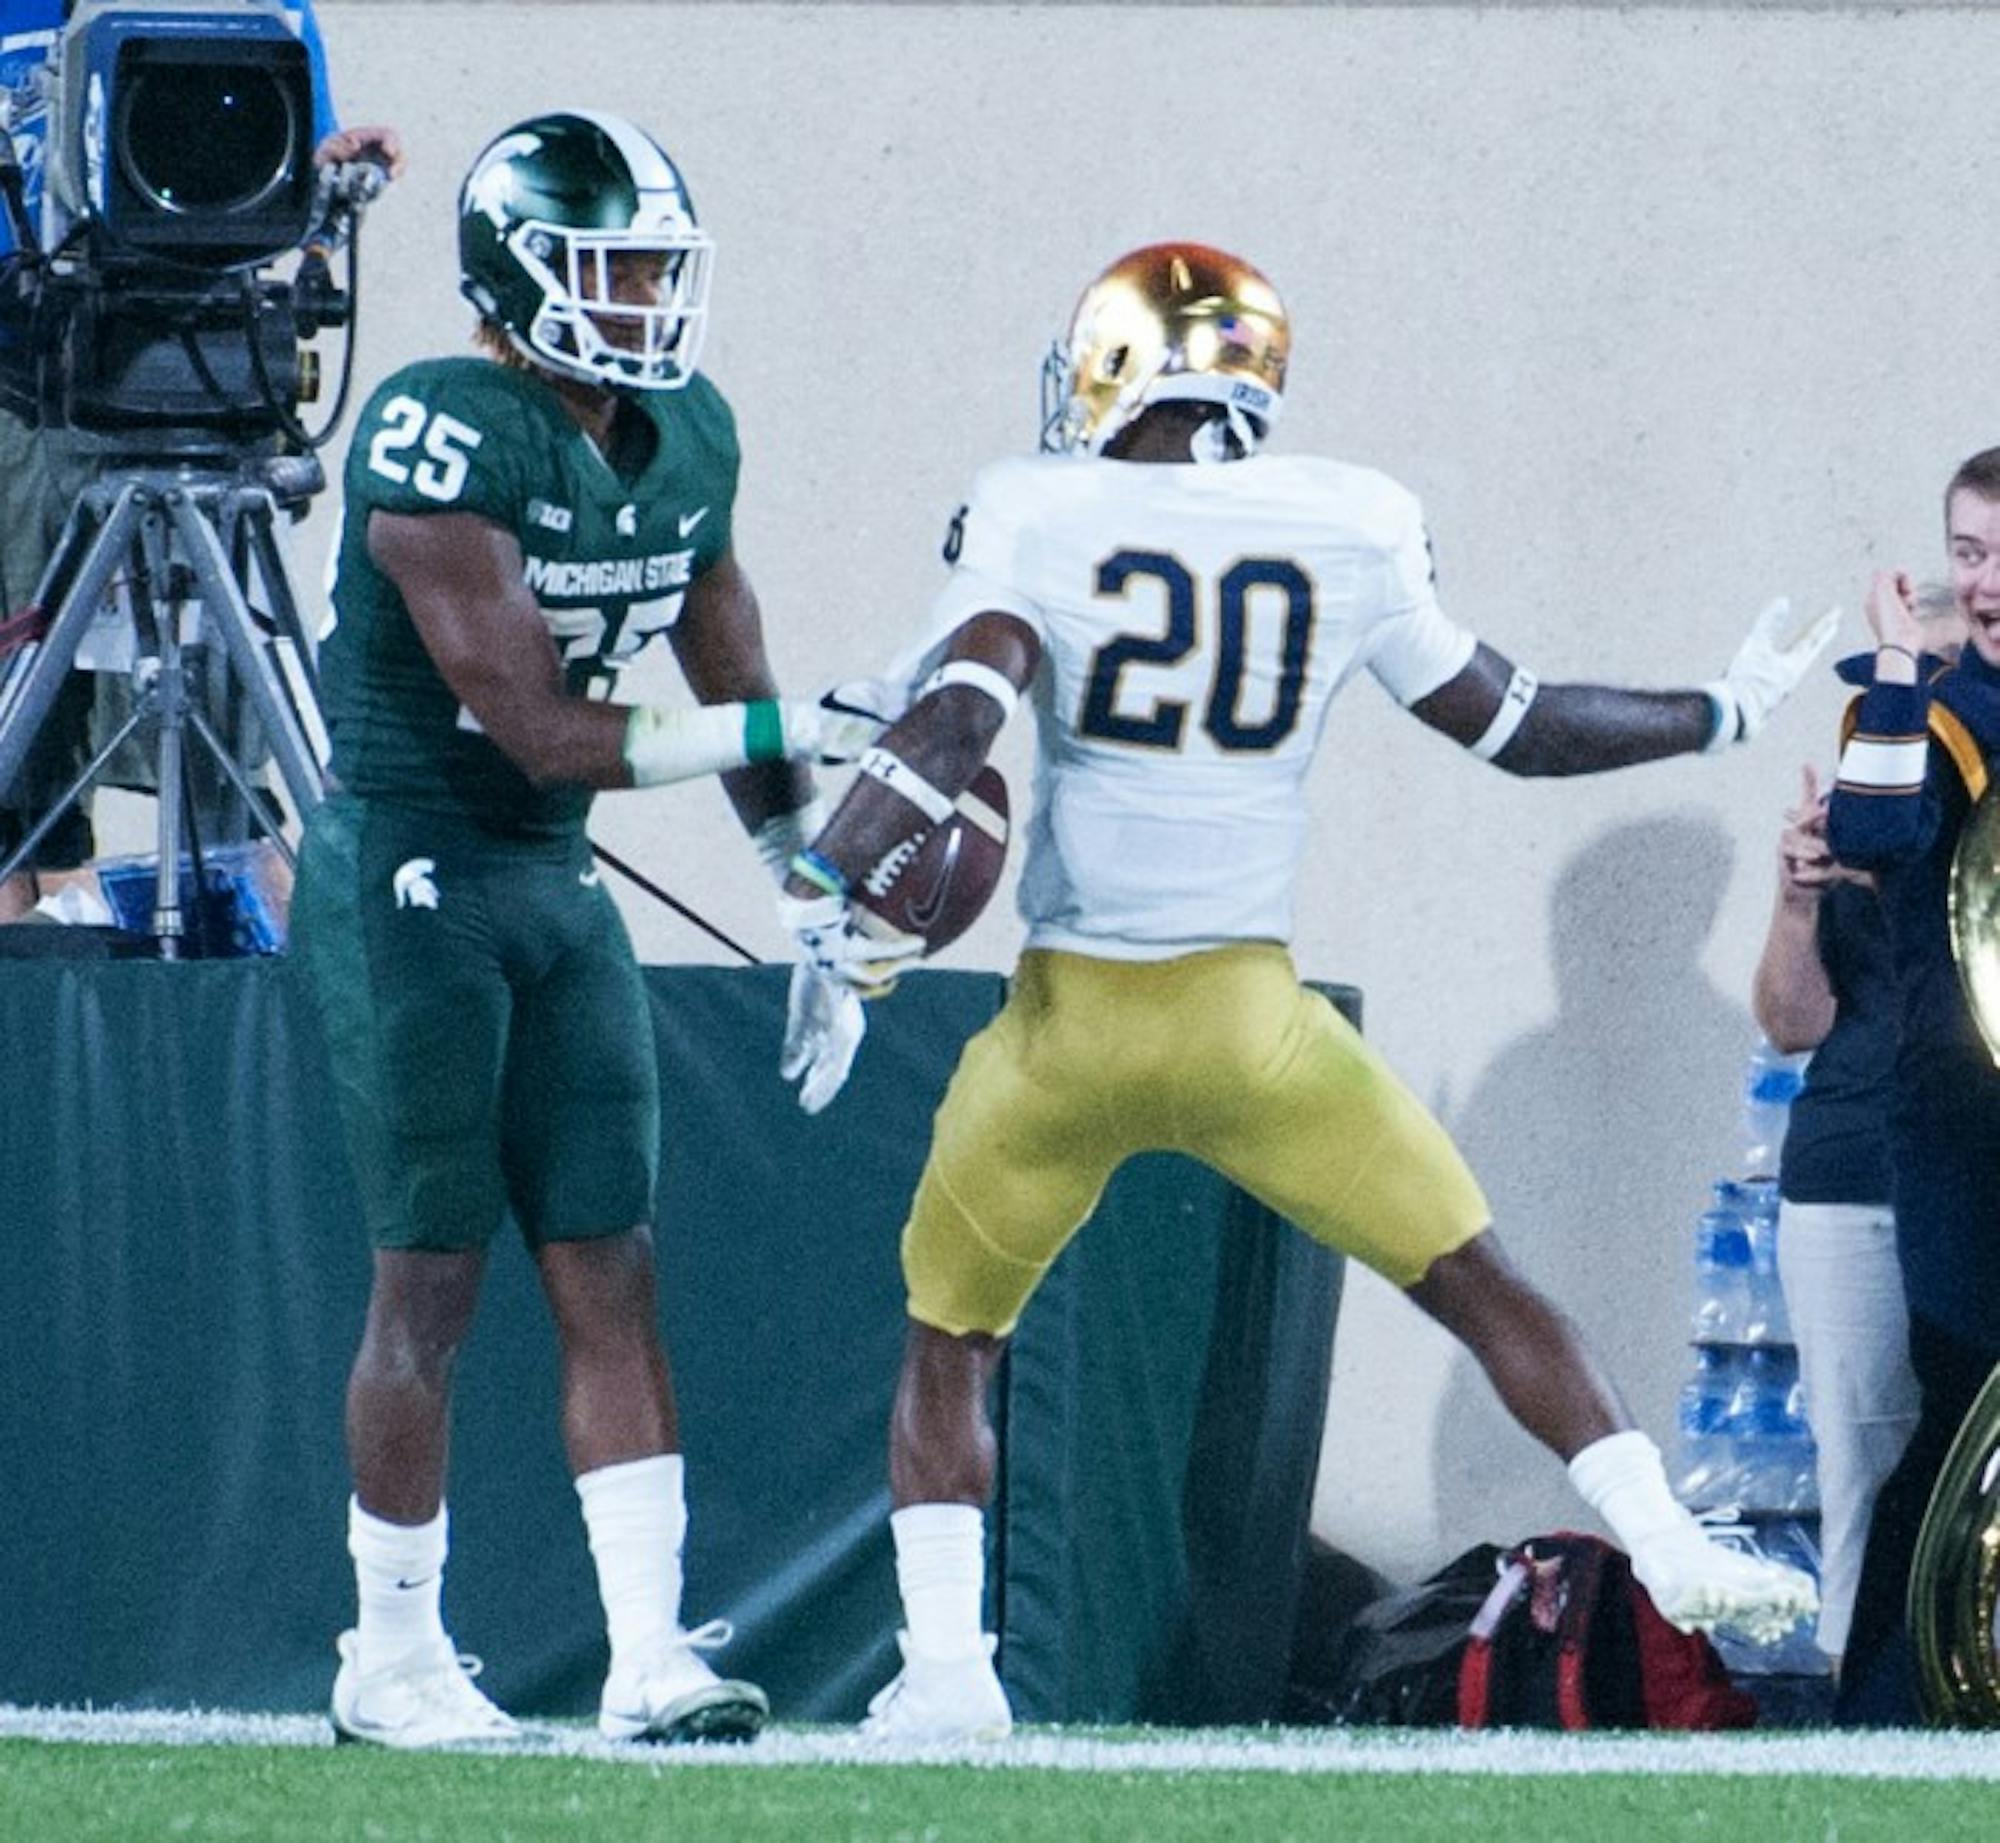 Irish junior cornerback Shaun Crawford celebrates after stripping the ball on the goal line and recovering the fumble in the endzone during Notre Dame’s 38-18 win over Michigan State on Saturday.